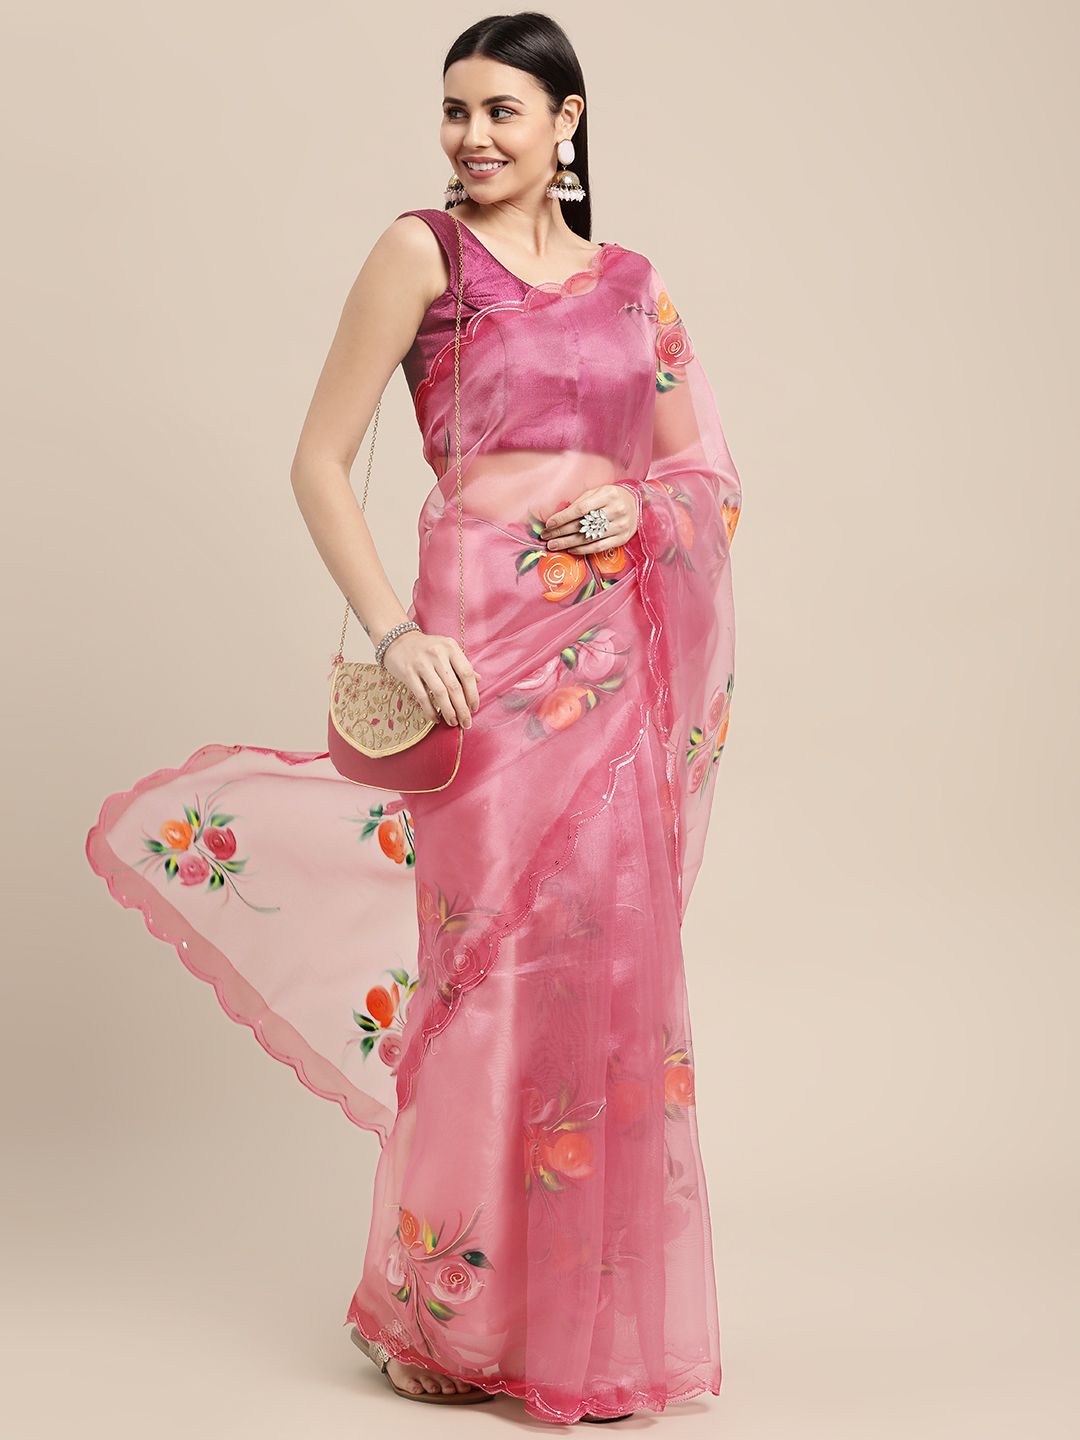 VASTRANAND Pink Floral Printed Sequined Scalloped Edge Organza Saree with Blouse Price in India